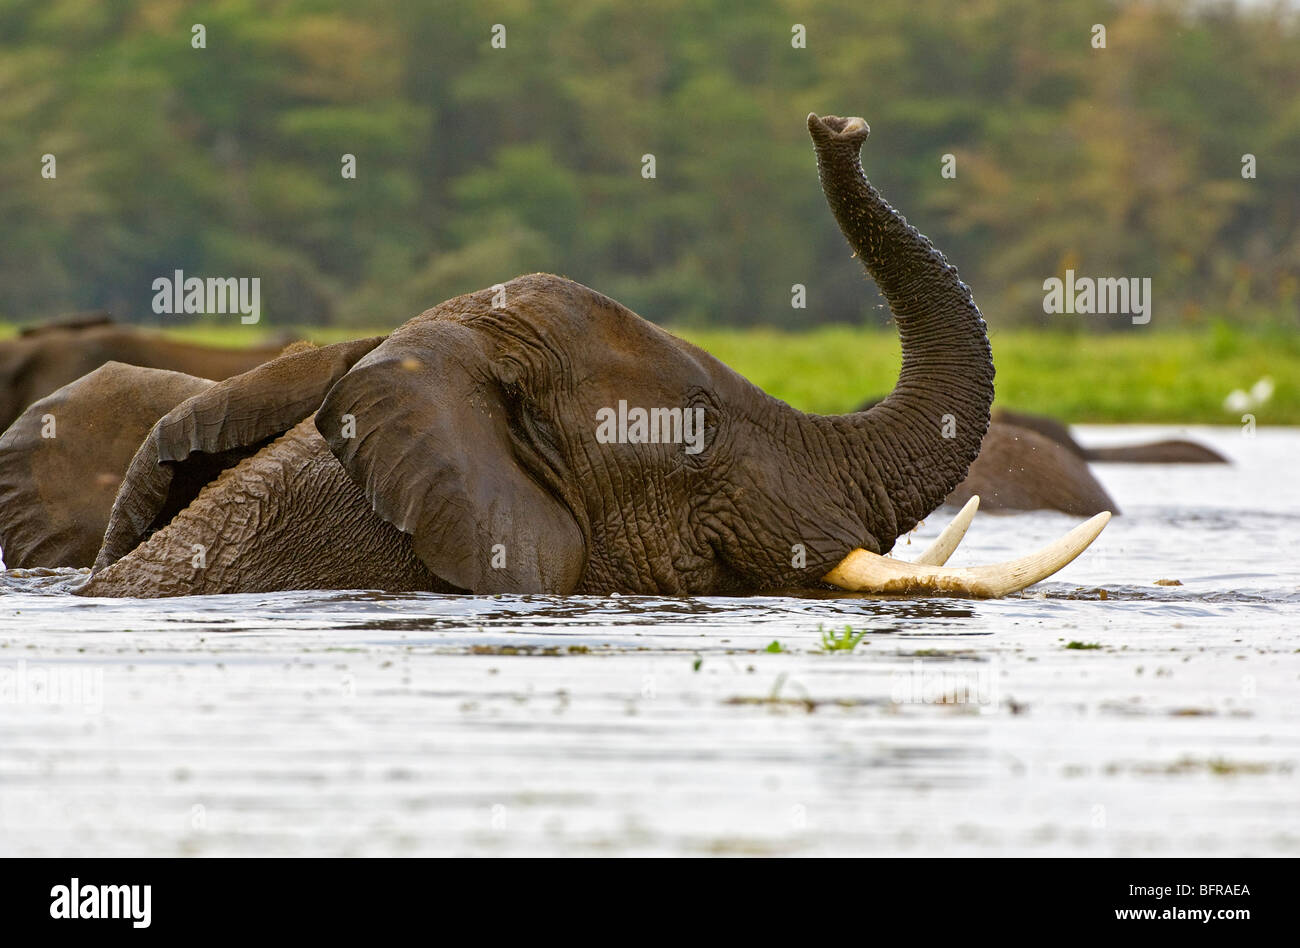 African Elephant in water (Loxodonta africana) Stock Photo